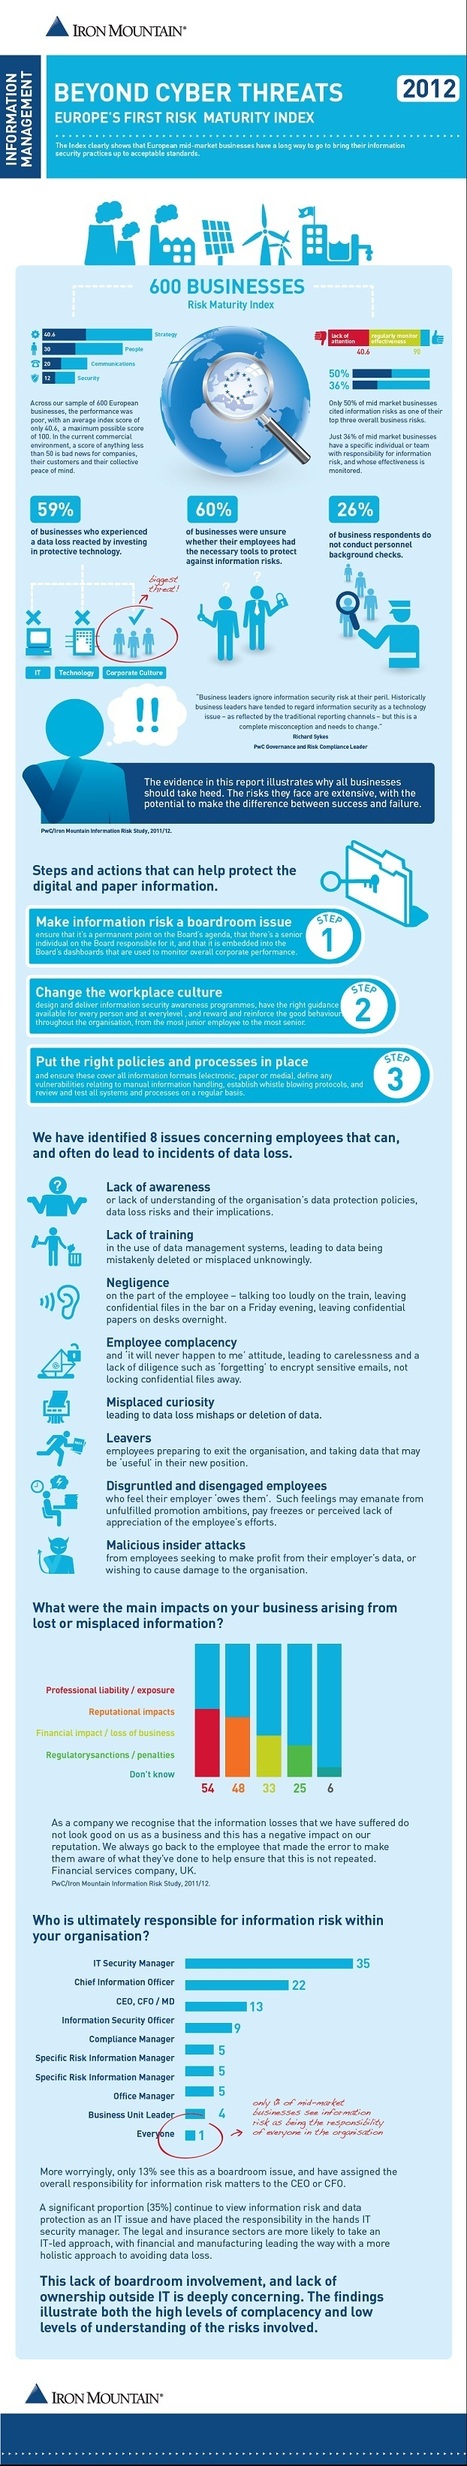 Infographic of the week: Why ignoring information security is lethal | Pedalogica: educación y TIC | Scoop.it